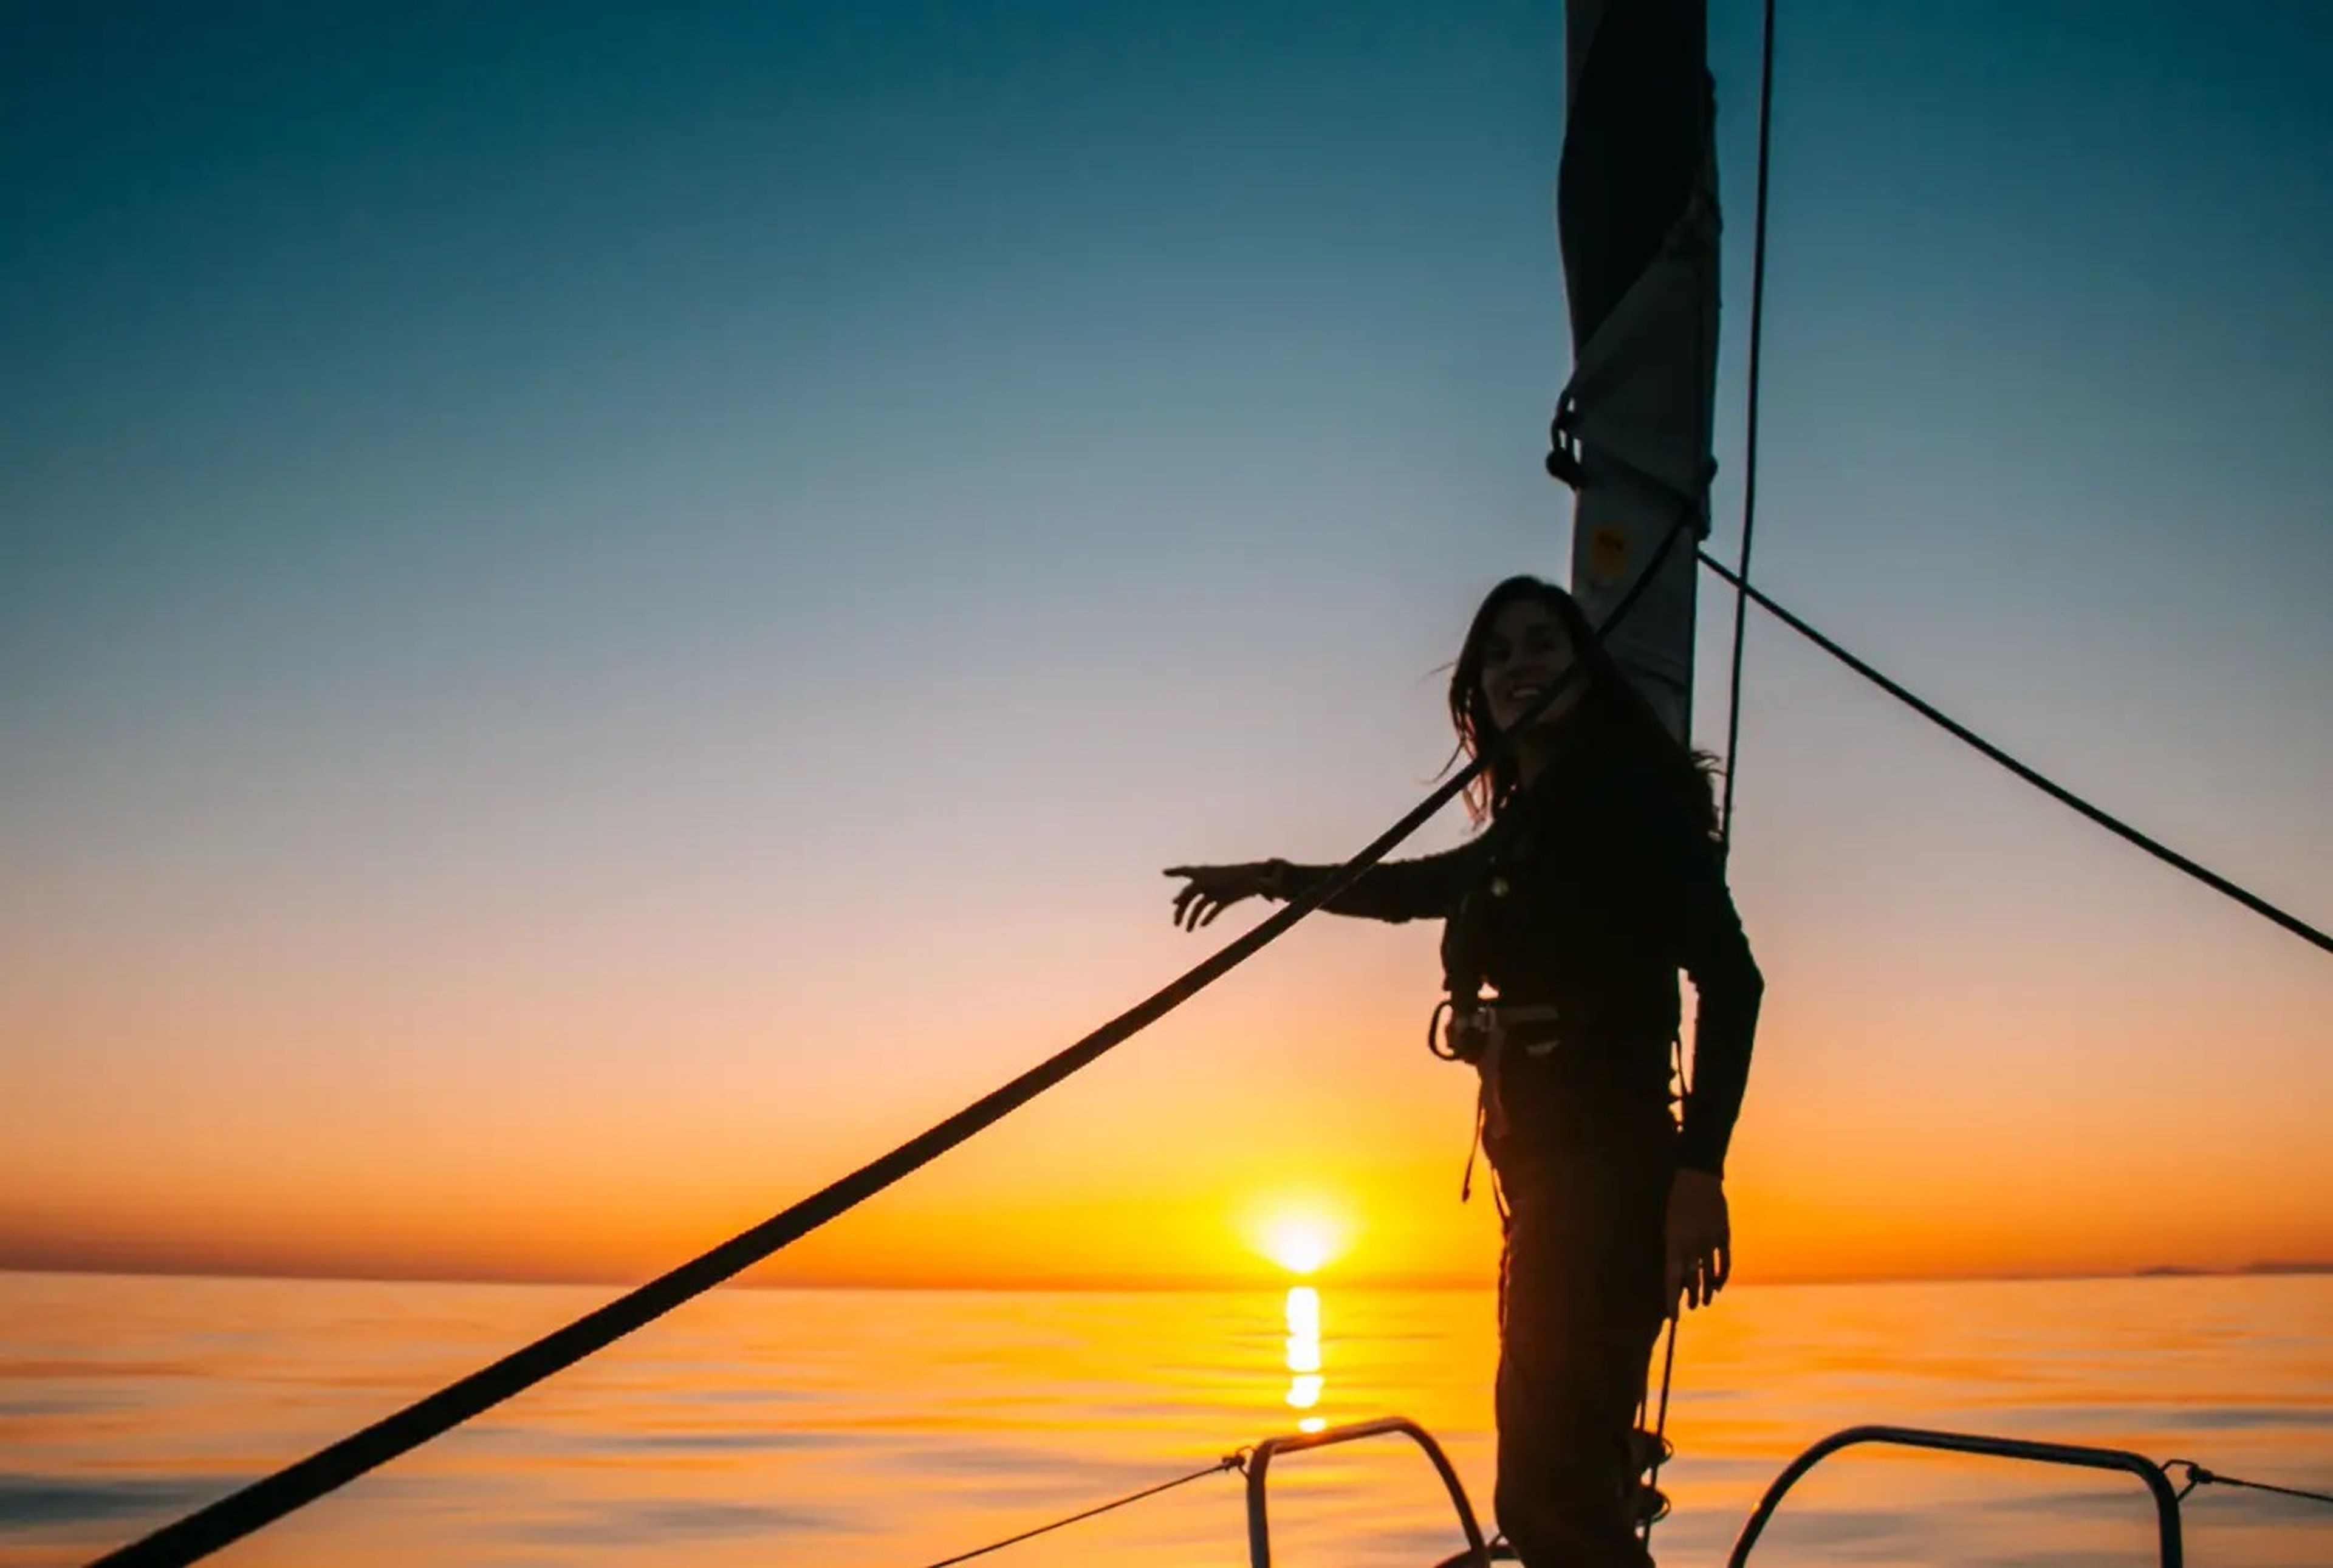 A woman pointing to the horizon on a sailboat.